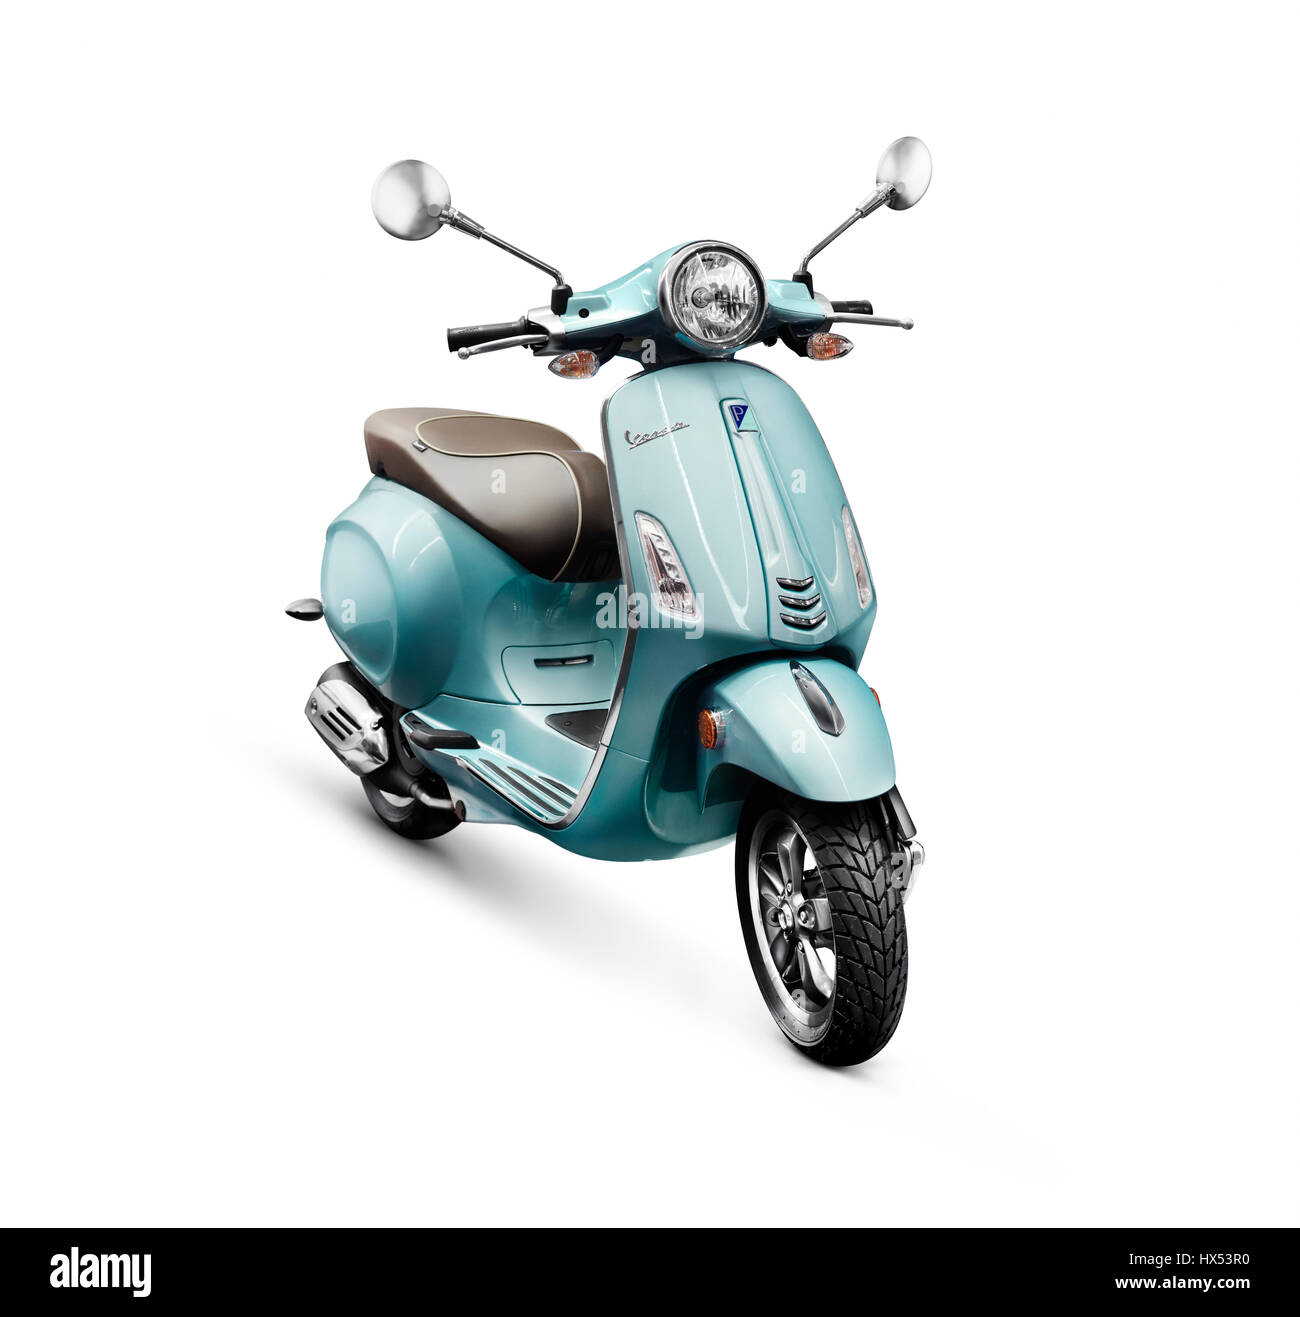 Blue 2017 motor scooter Vespa manufactured by Piaggio isolated on white background with clipping path Stock Photo